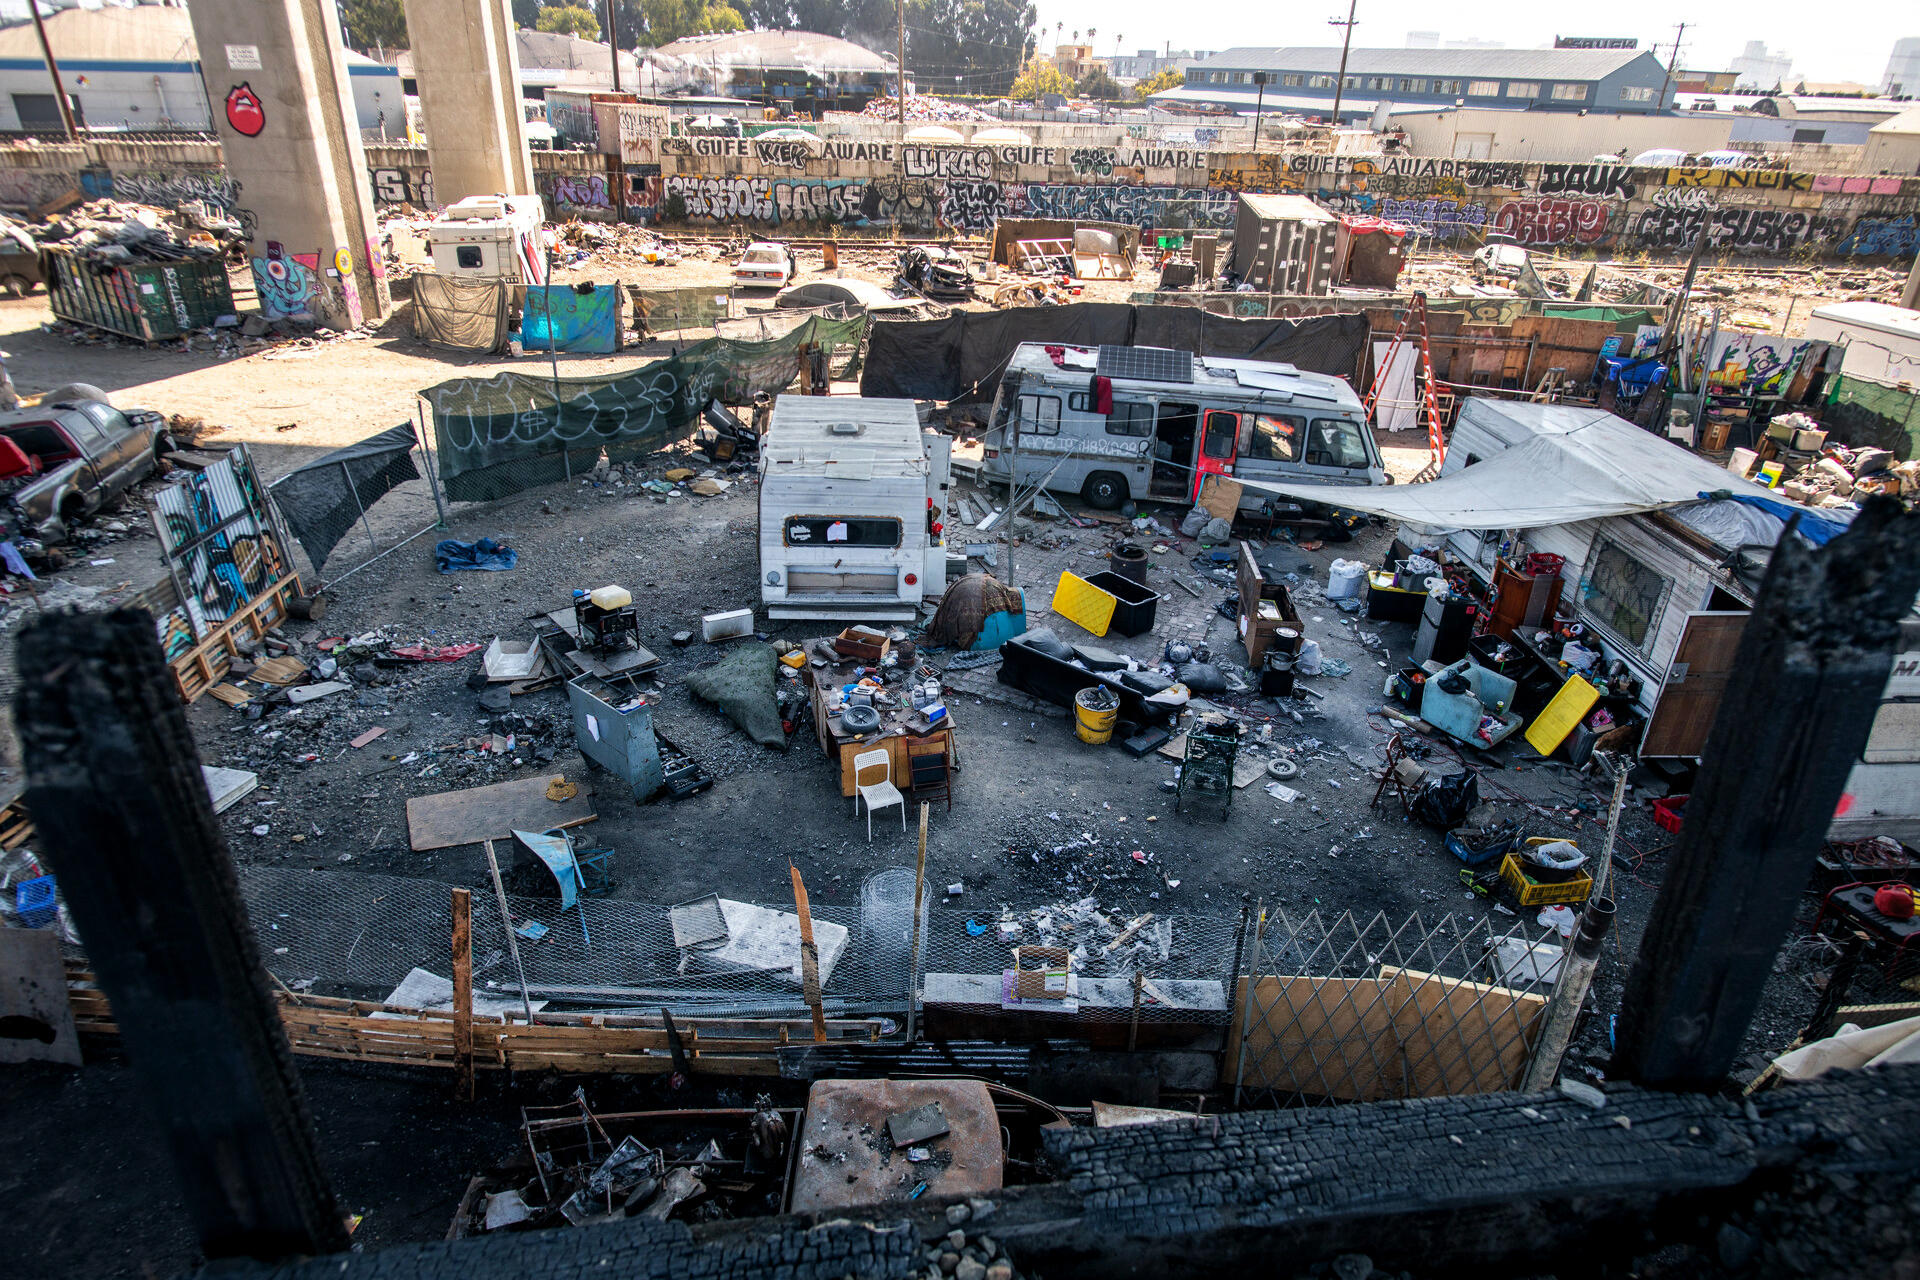 An aerial view of a homeless encampment with trailers, tents and people's belongings scattered about underneath a freeway overpass.